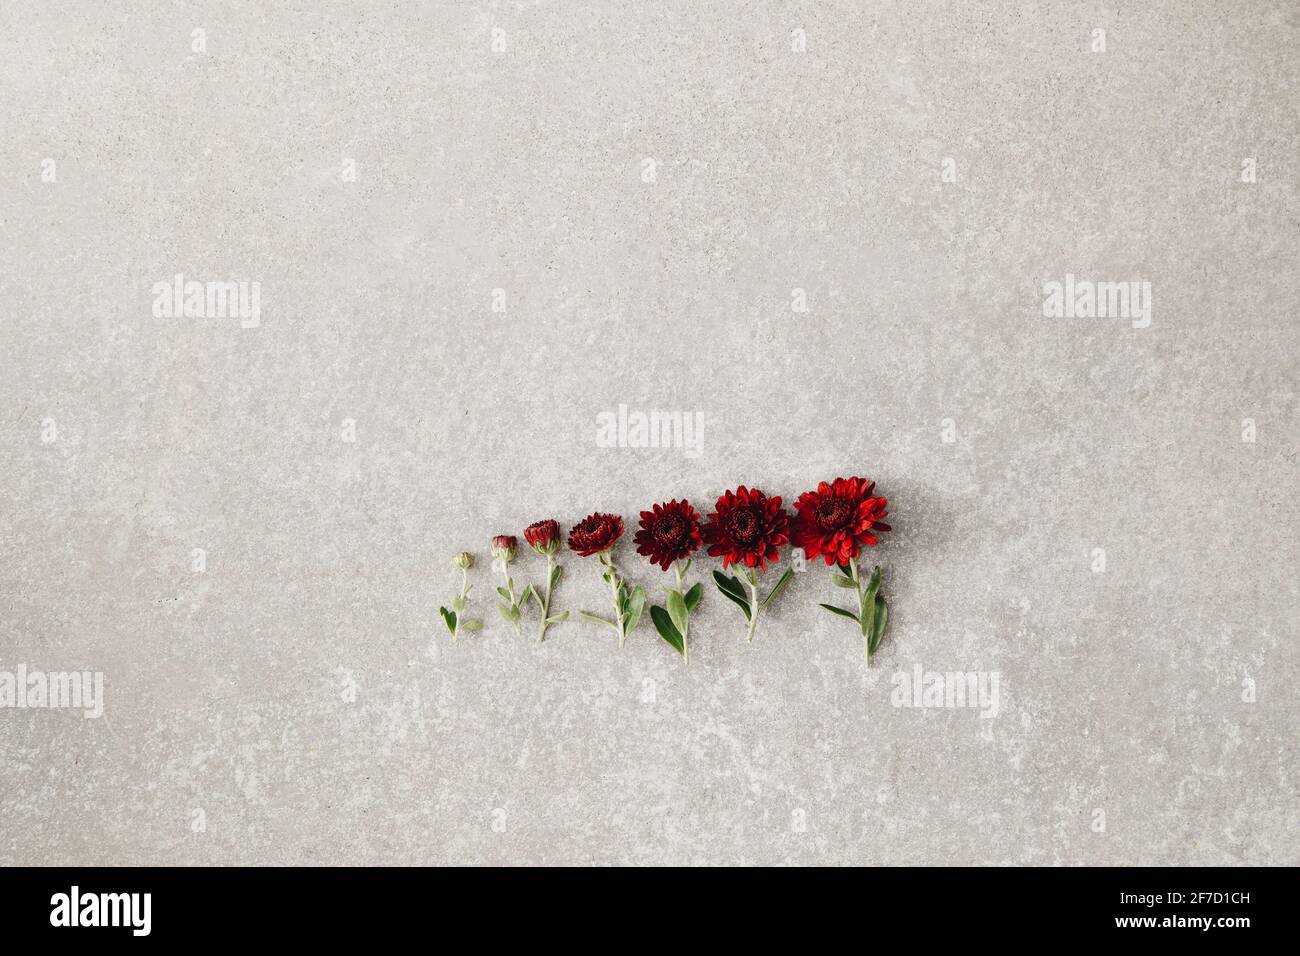 Plant Growth Comparison High Resolution Stock Photography and Images - Alamy